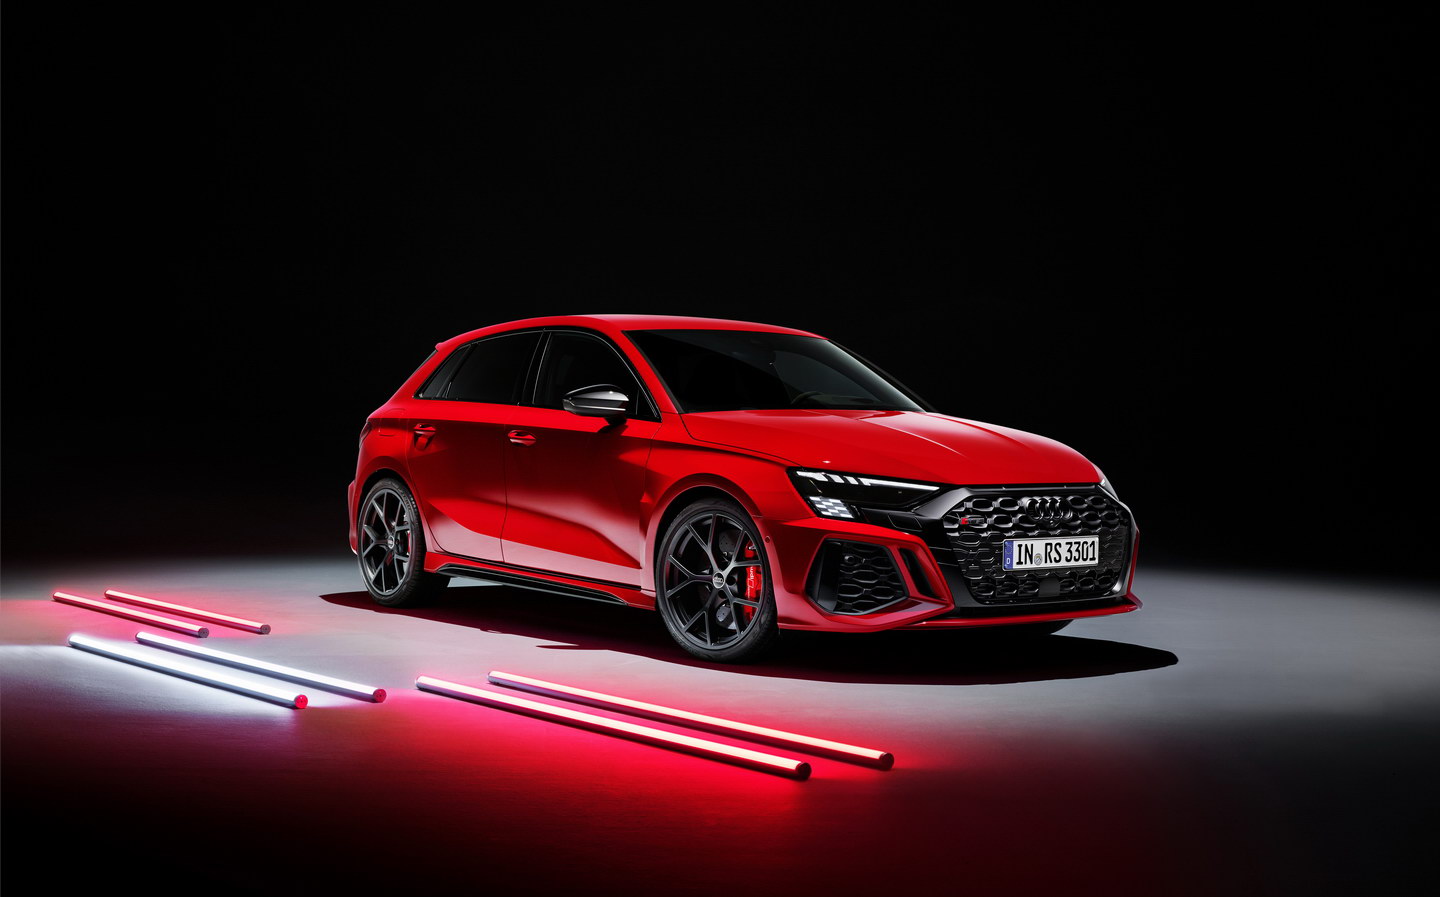 https://www.driving.co.uk/wp-content/uploads/sites/5/2021/07/Audi-RS-3-2022-001.jpg